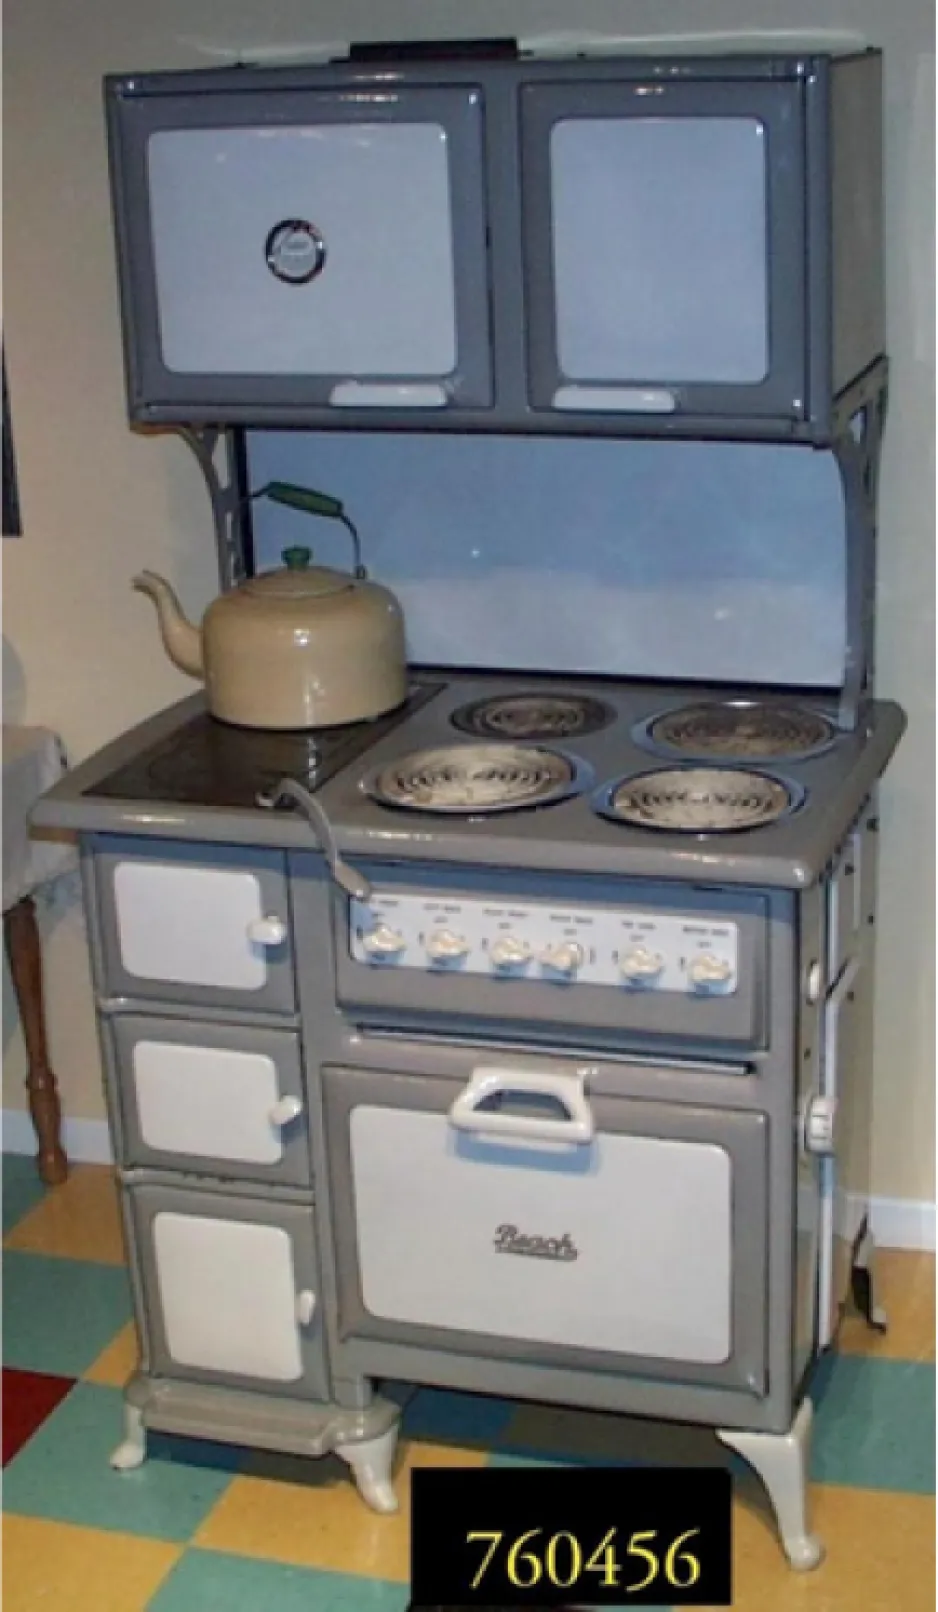 A large grey and white range with four coiled electric elements, a large oven, and several small warming ovens. 